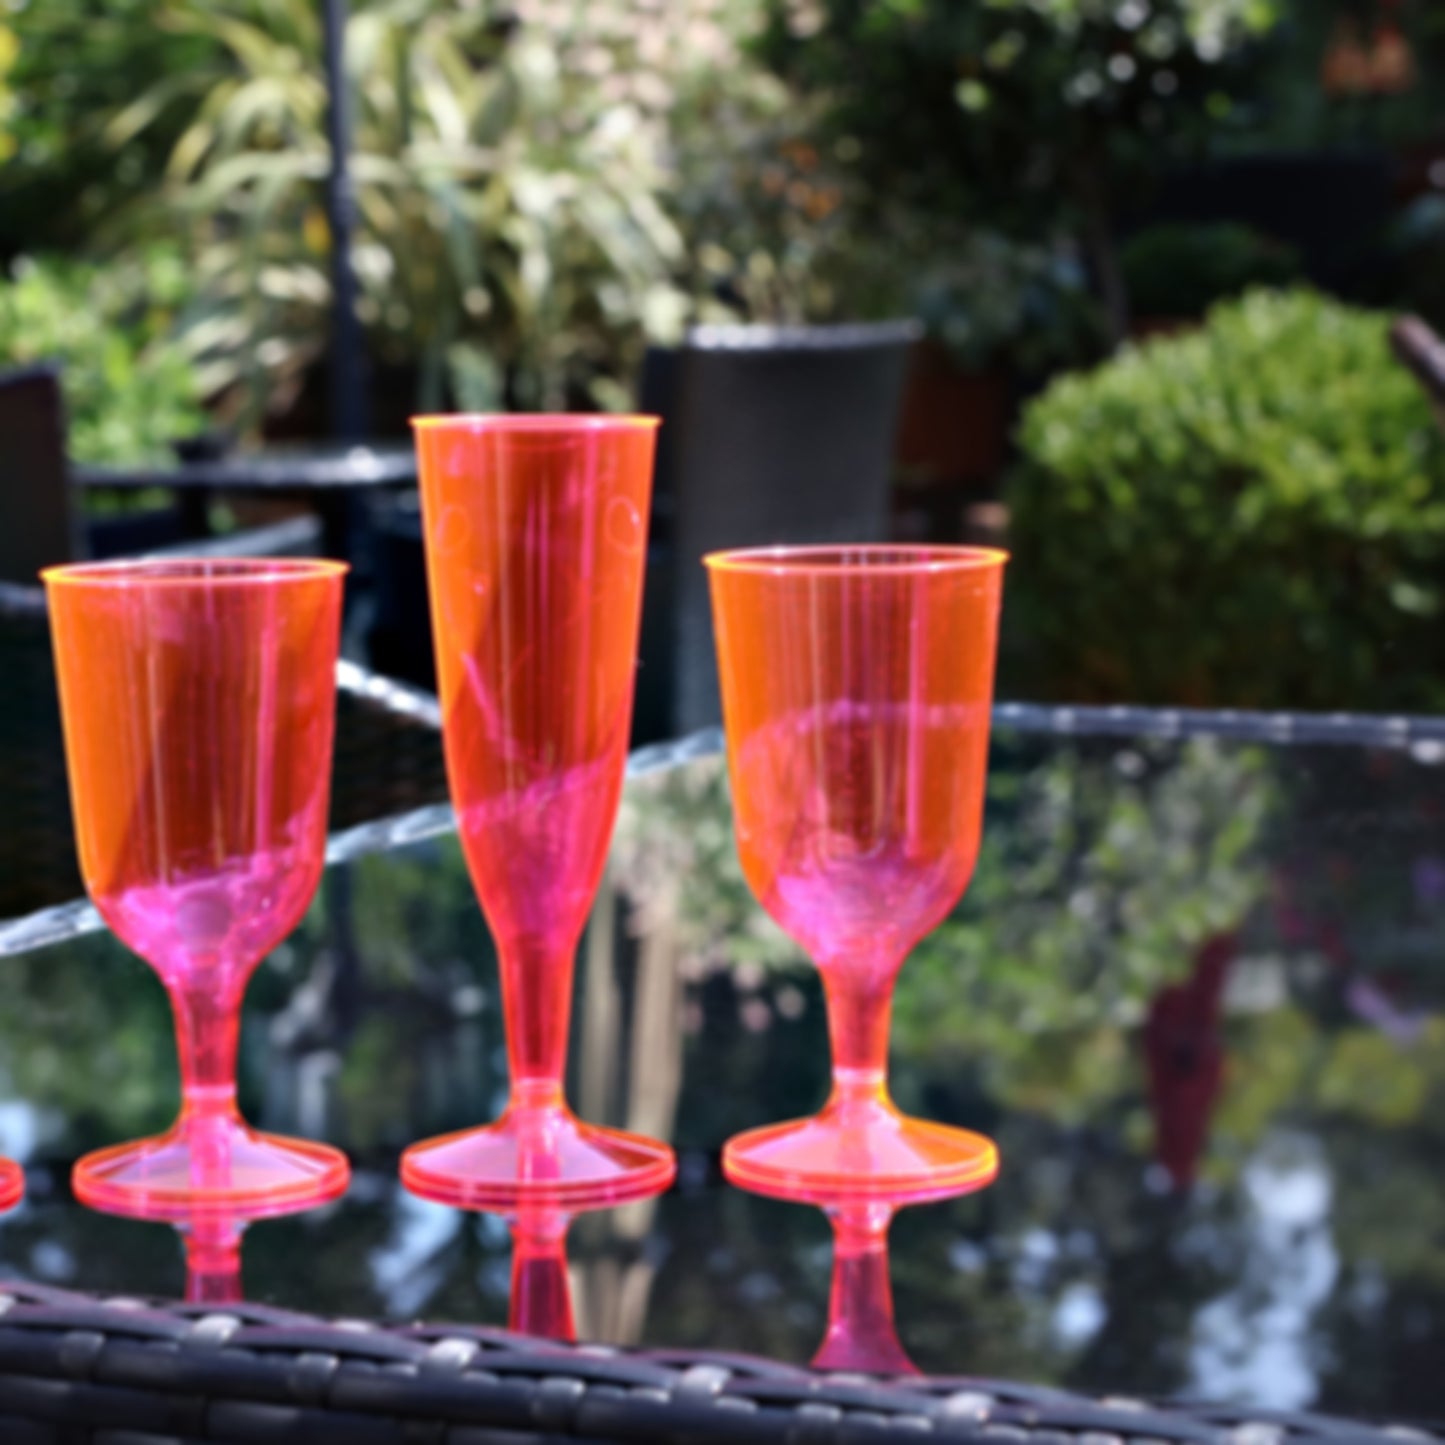 24 x Pink Prosecco Flutes 175ml 6oz Capacity Recyclable Polystyrene Material Transparent 2-Piece Sturdy Champagne Glasses BBQs Picnics-5056020179733-PCUP-CHAMP2PPINKx4-Product Pro-Champagne Glasses, Clear Champagne Glasses, Pink, Plastic Flutes, Prosecco Flutes